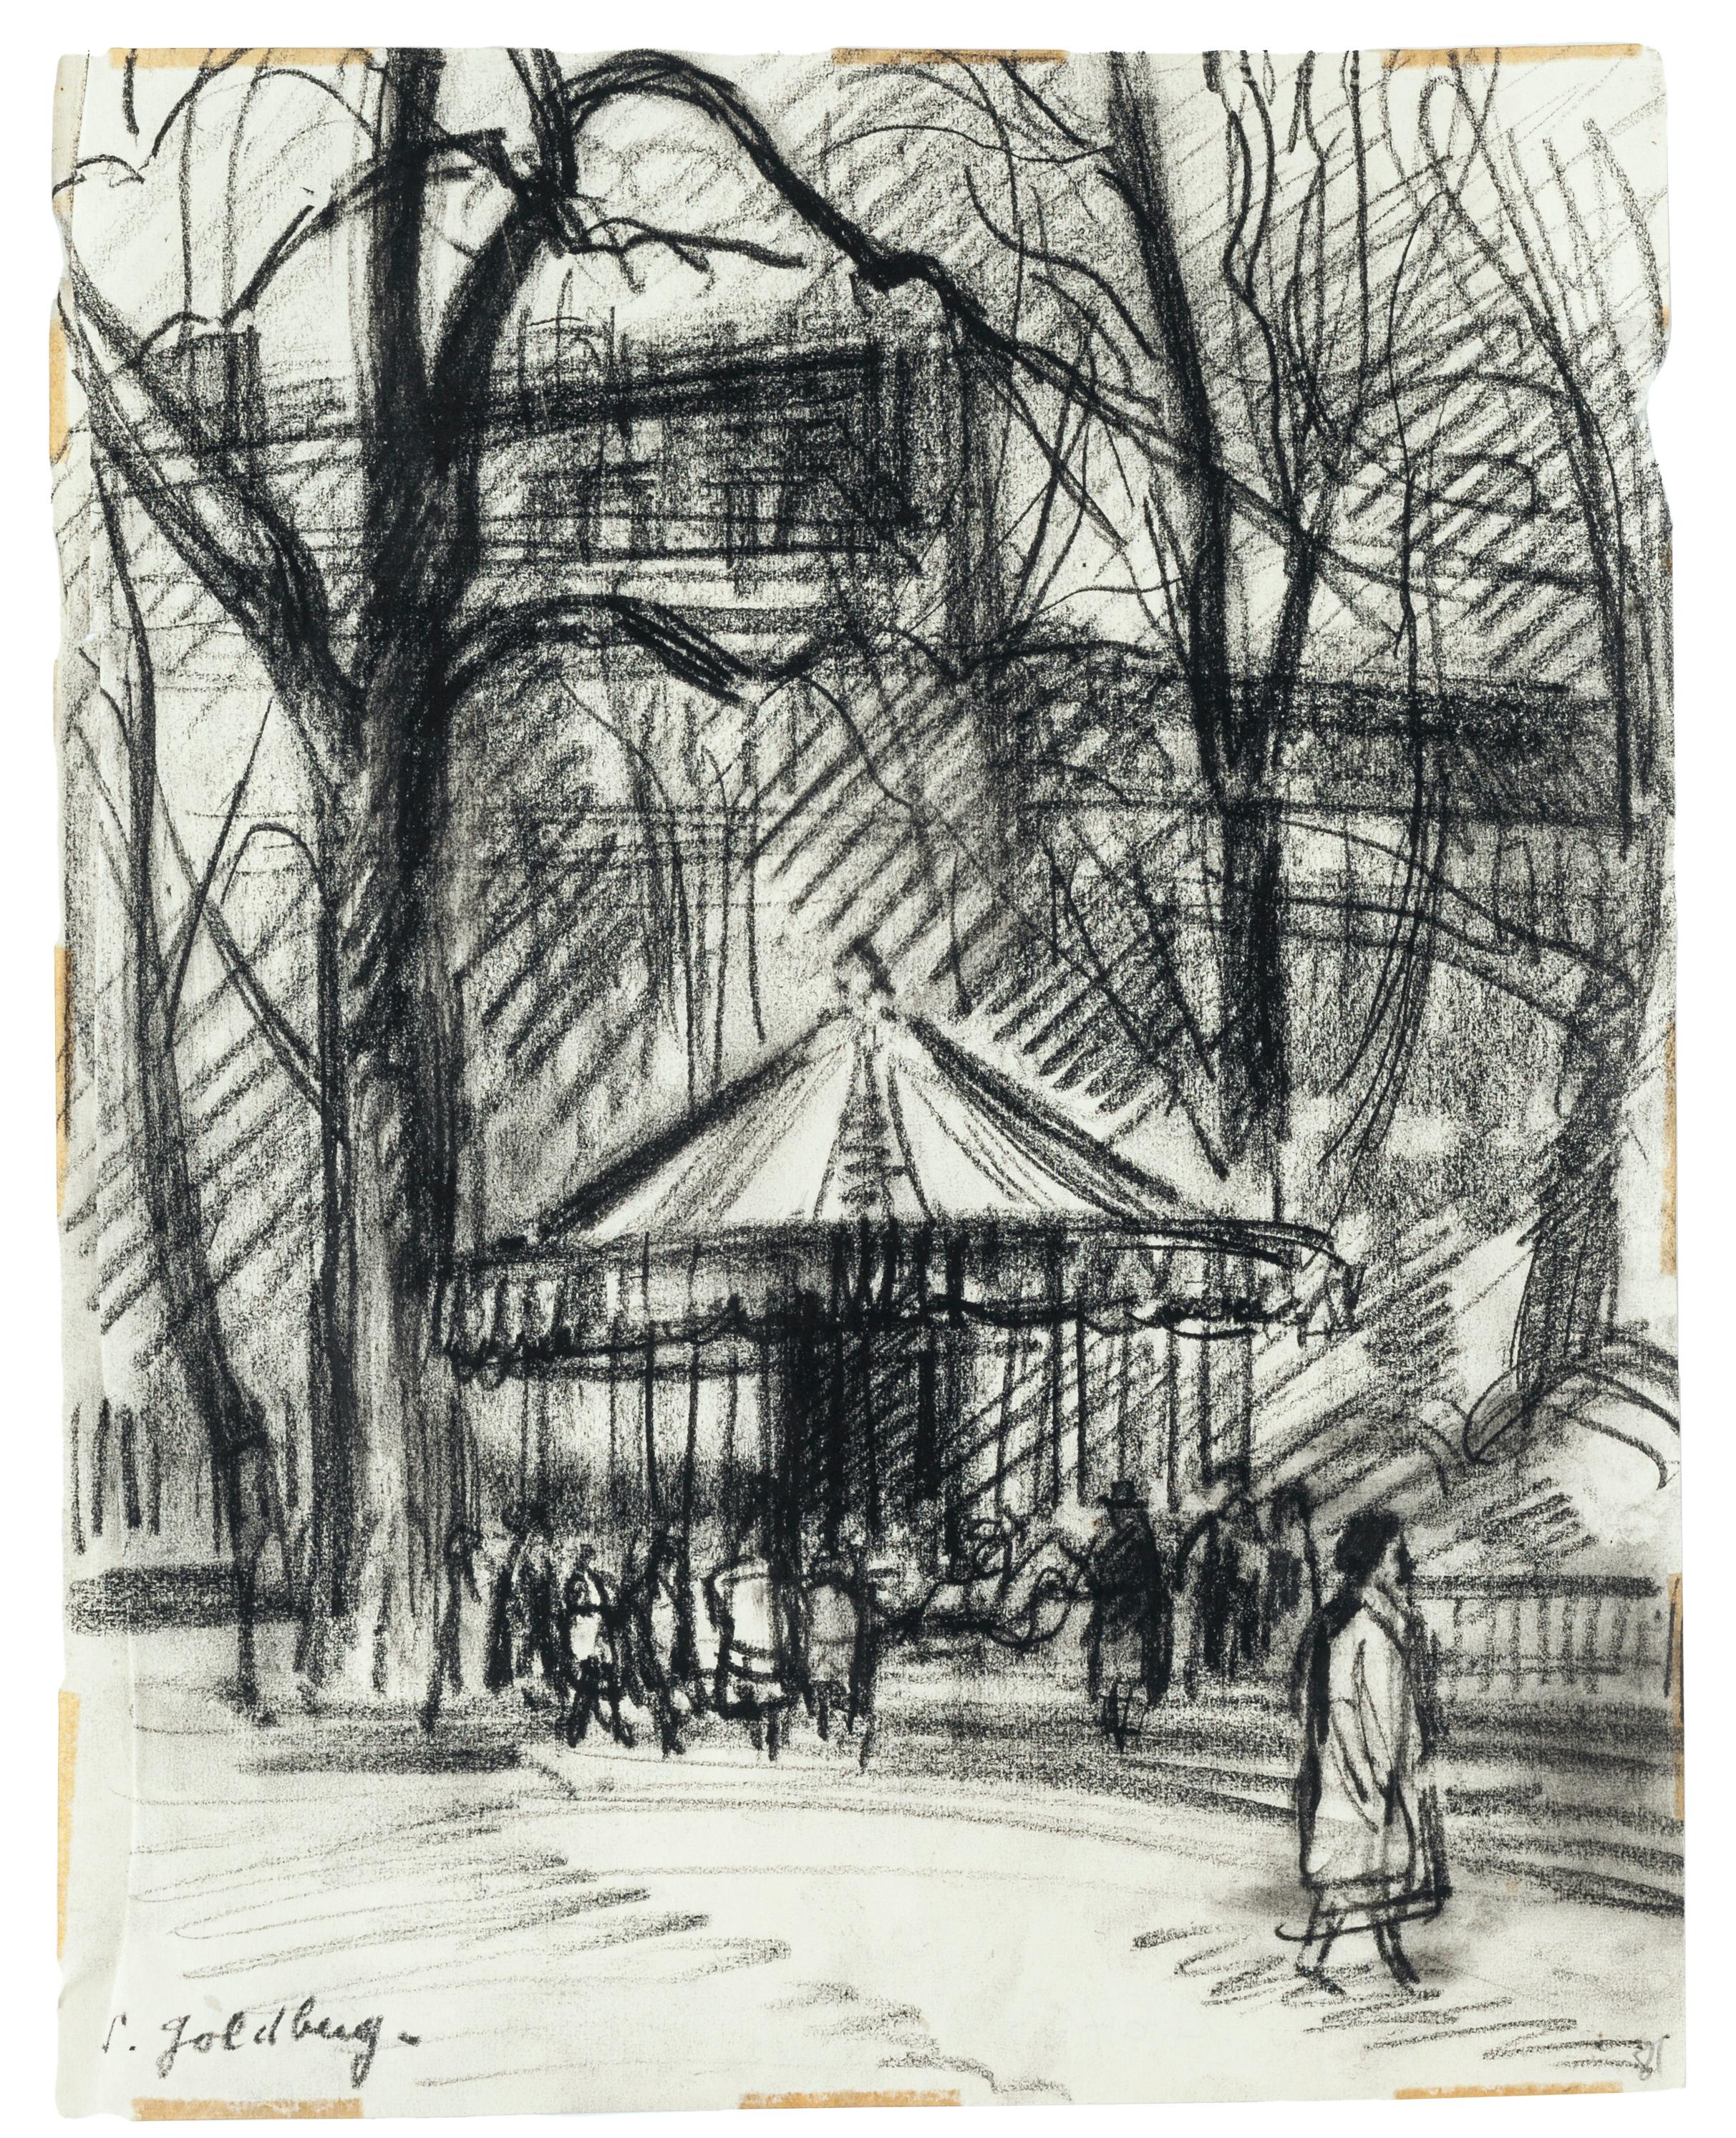 Park - Original Charcoal Drawing by S. Goldberg - Mid 20th Century